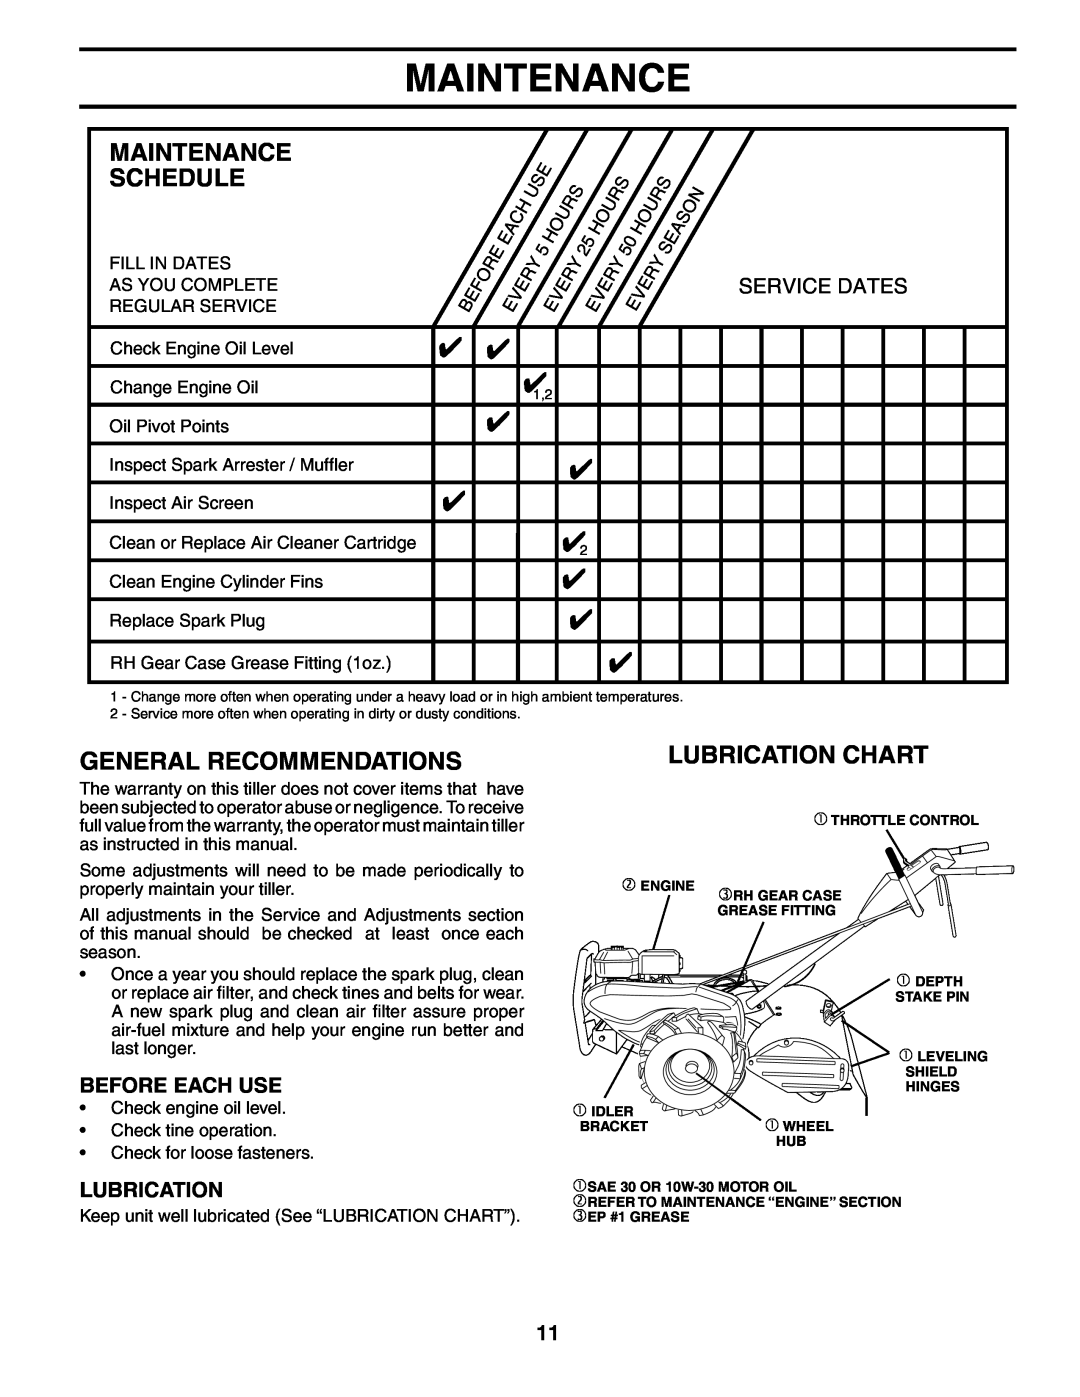 Poulan PRRT65 manual Maintenance Schedule, General Recommendations, Lubrication Chart, Before Each Use, Service Dates 